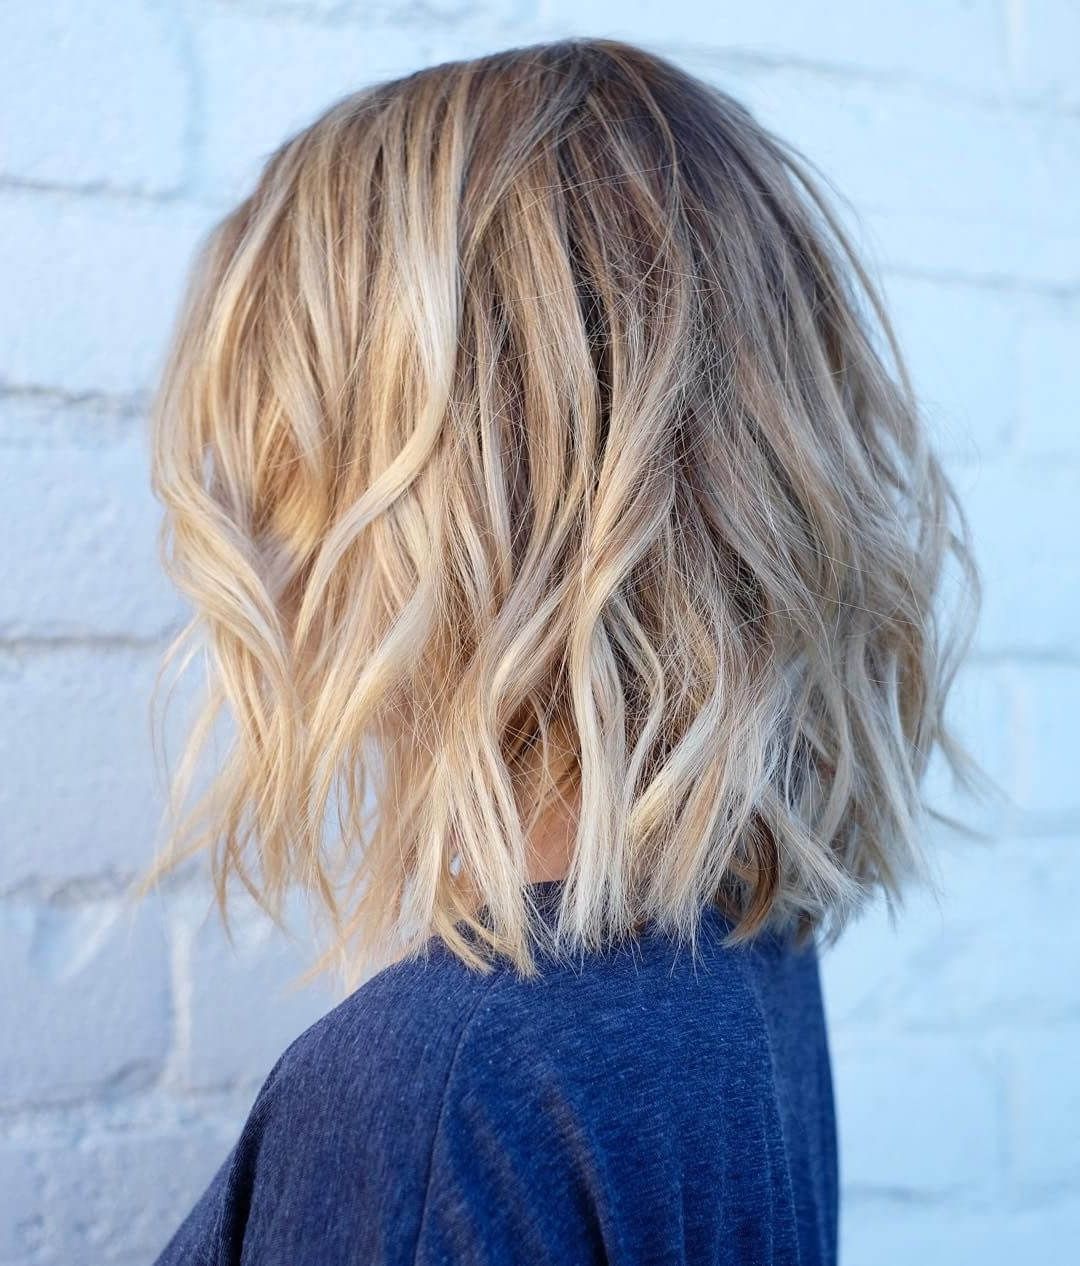 50 Fresh Short Blonde Hair Ideas To Update Your Style In 2018 Within 2018 Side Parted Blonde Balayage Pixie Haircuts (View 11 of 15)